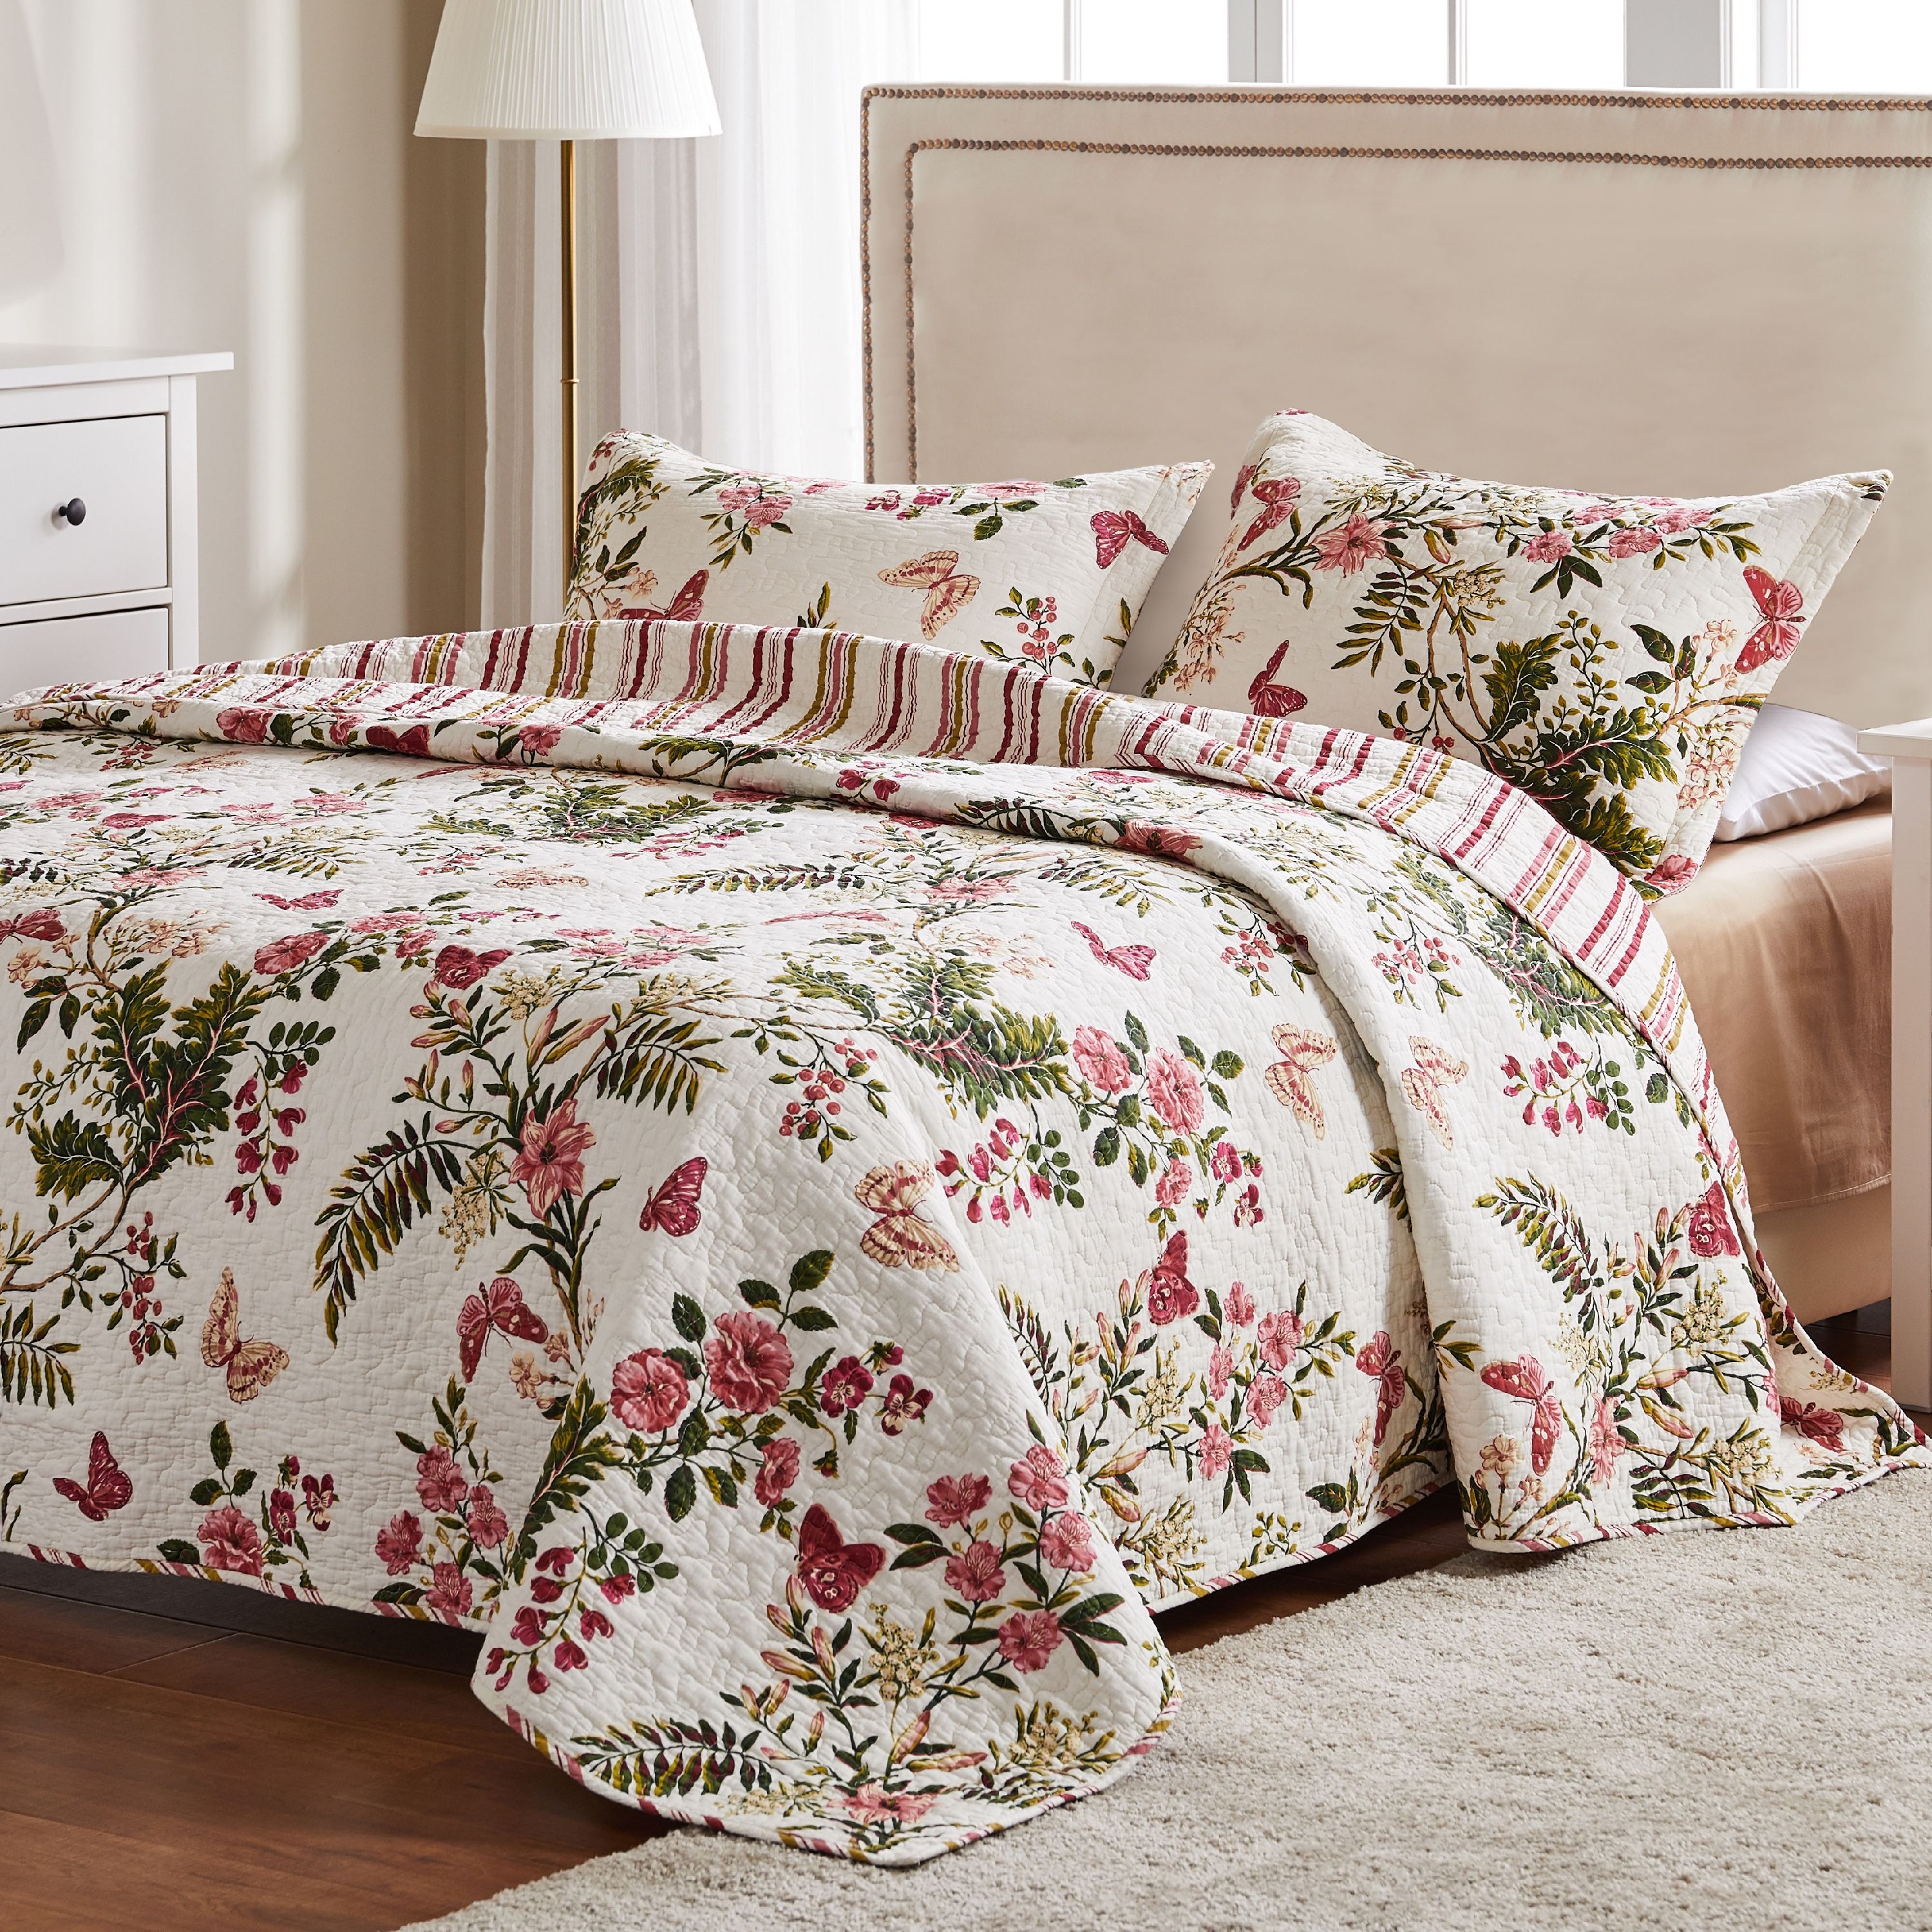 Greenland Home Butterflies 100% Cotton Reversible Oversized Botanical Quilt Set, 2-Piece Twin/Twin XL - image 1 of 5